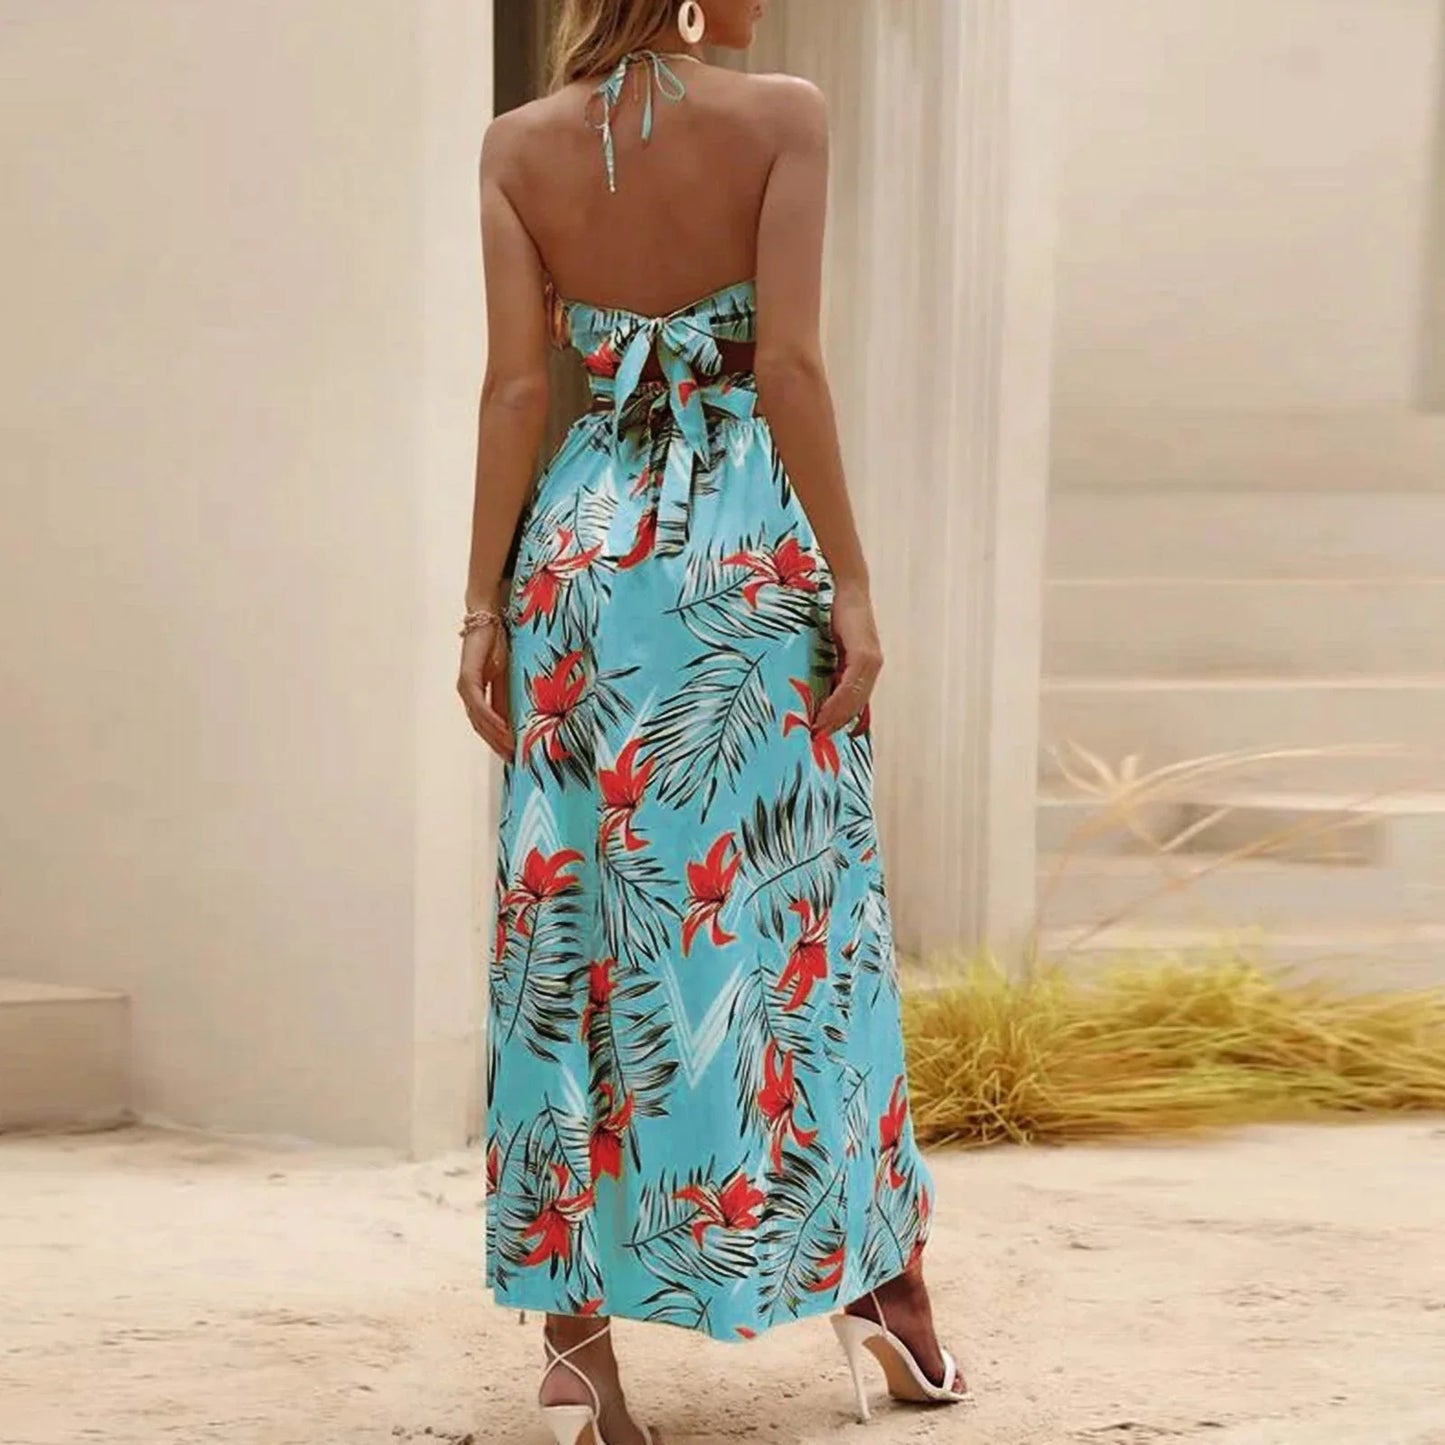 Wanny - Maxi dress with floral pattern